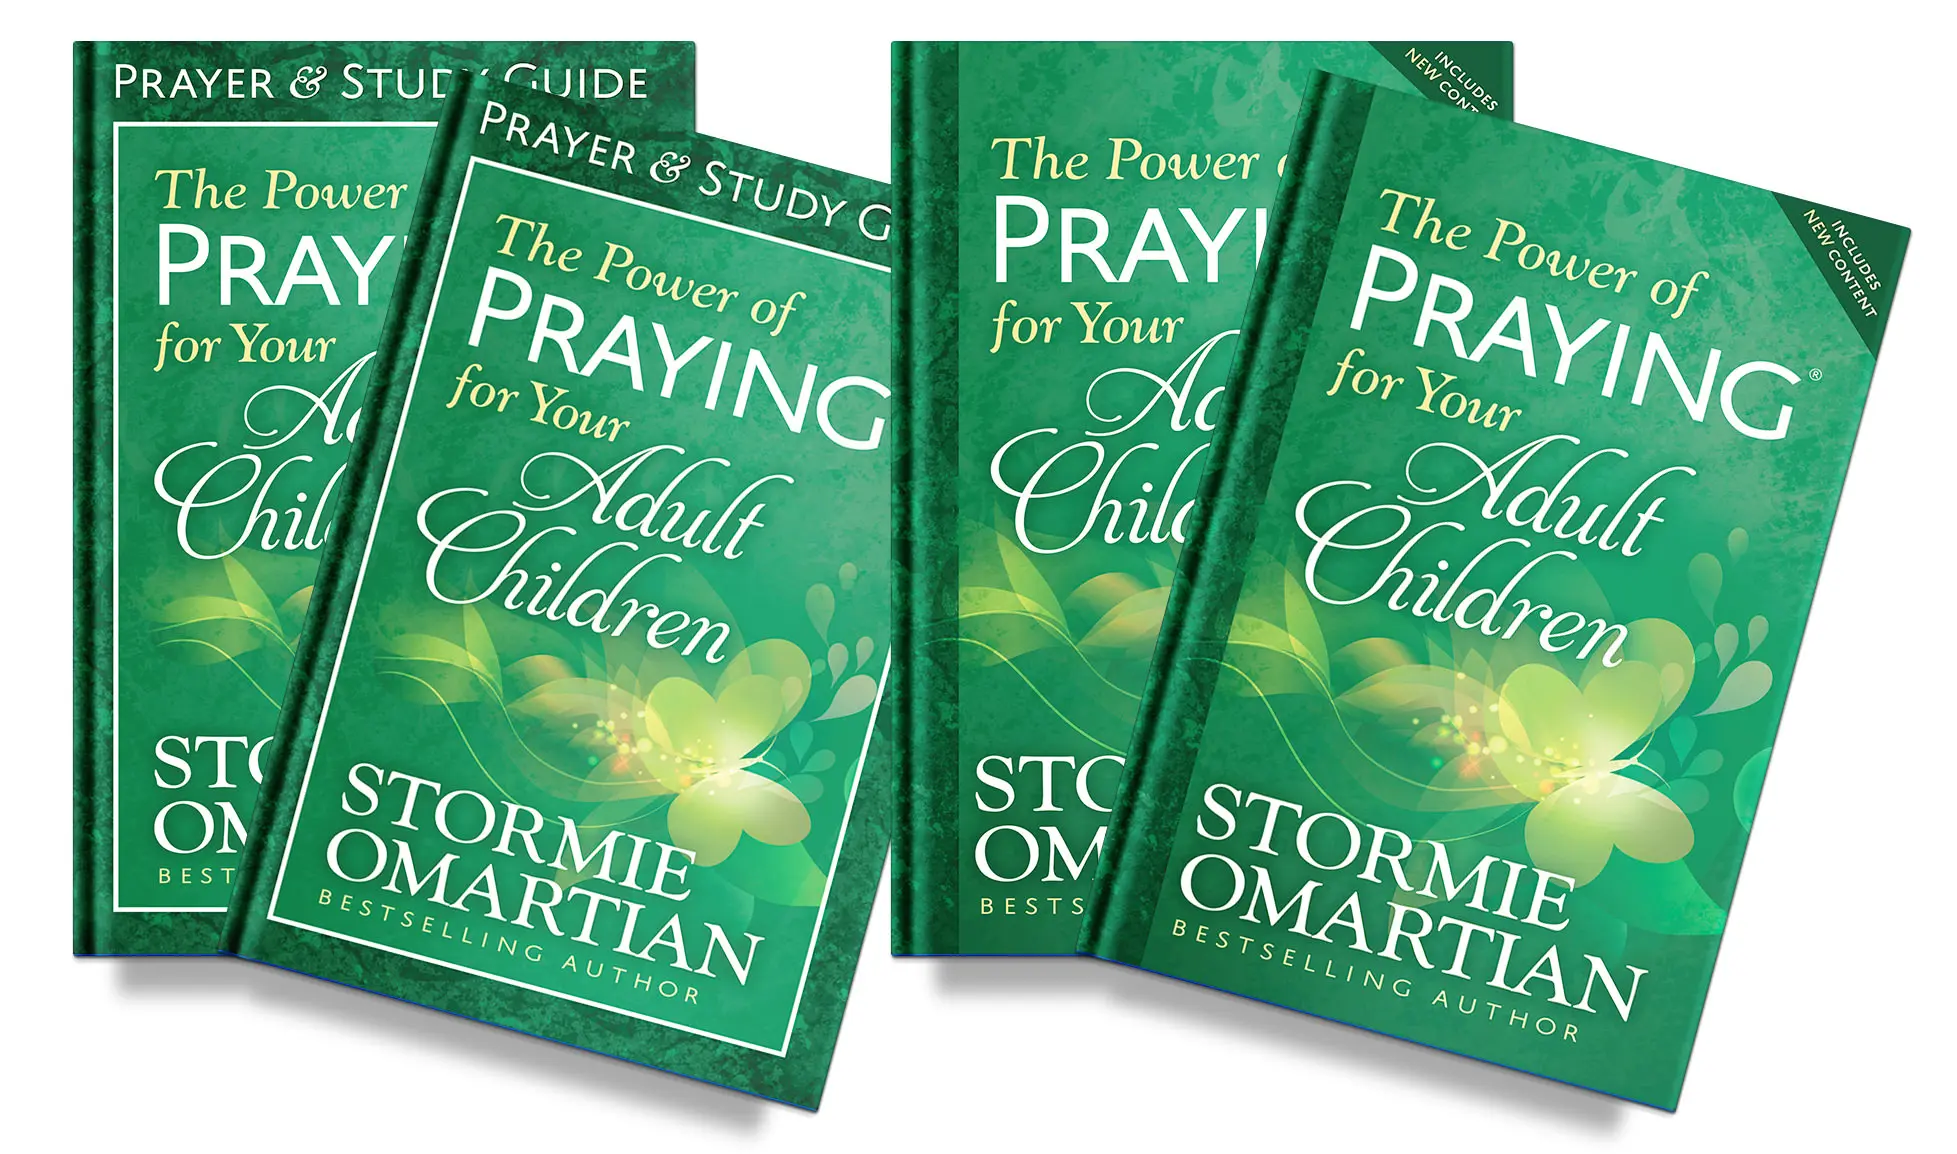 **Study Group** The Power of Praying for Your Adult Children